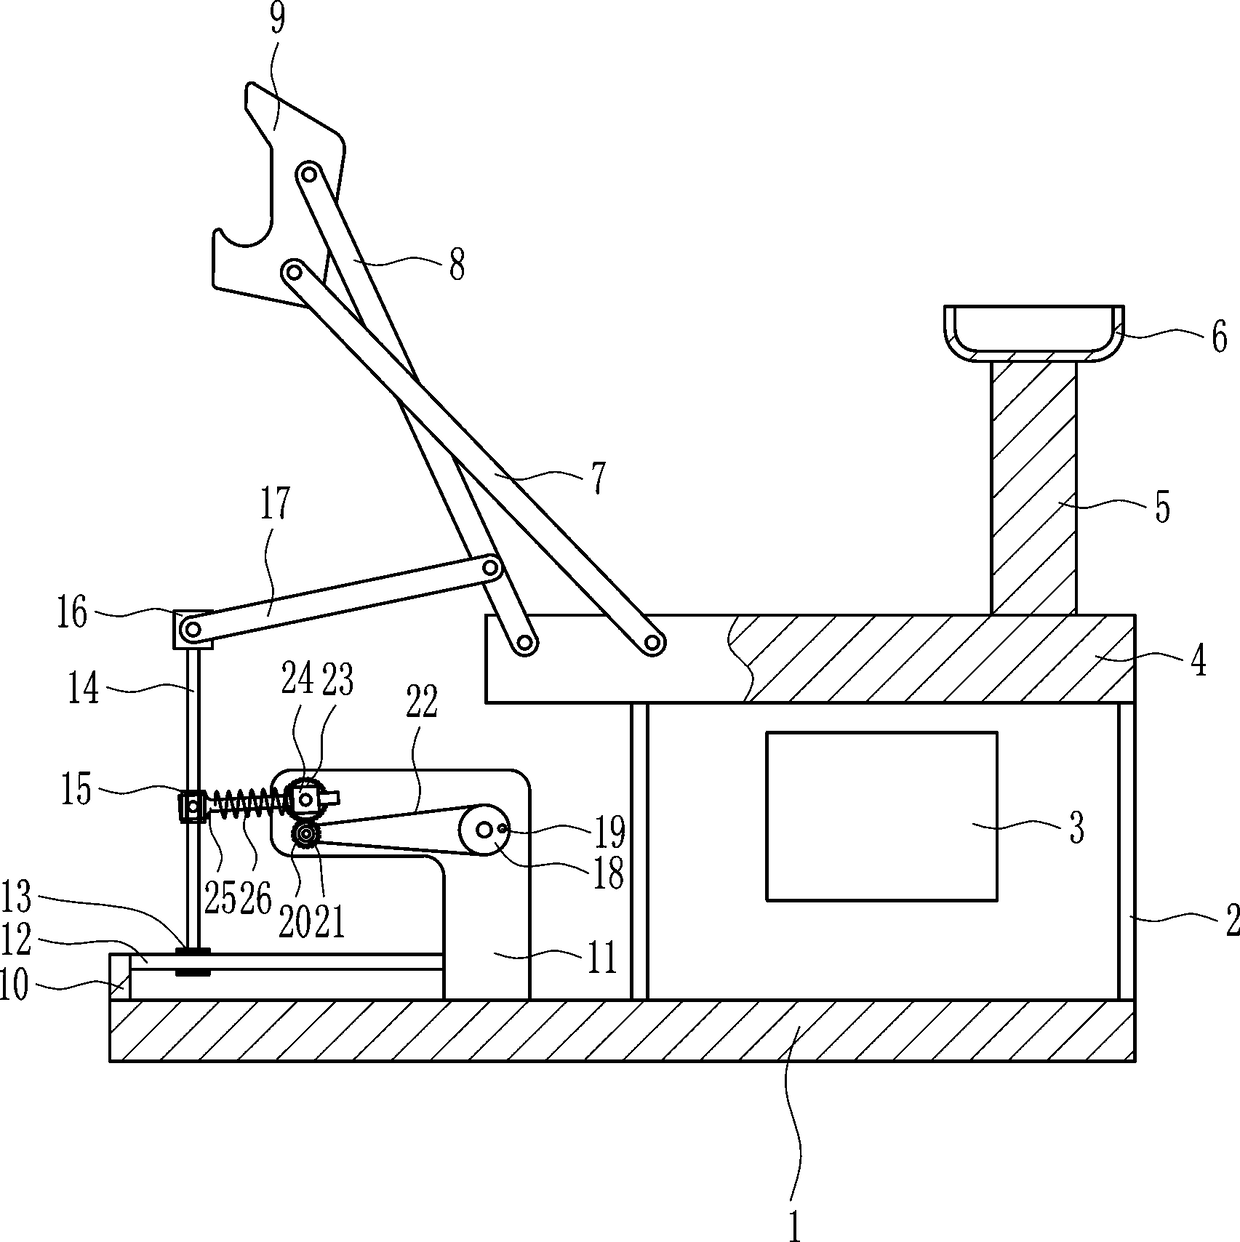 Linking rod transmission demonstration device for mechanical course